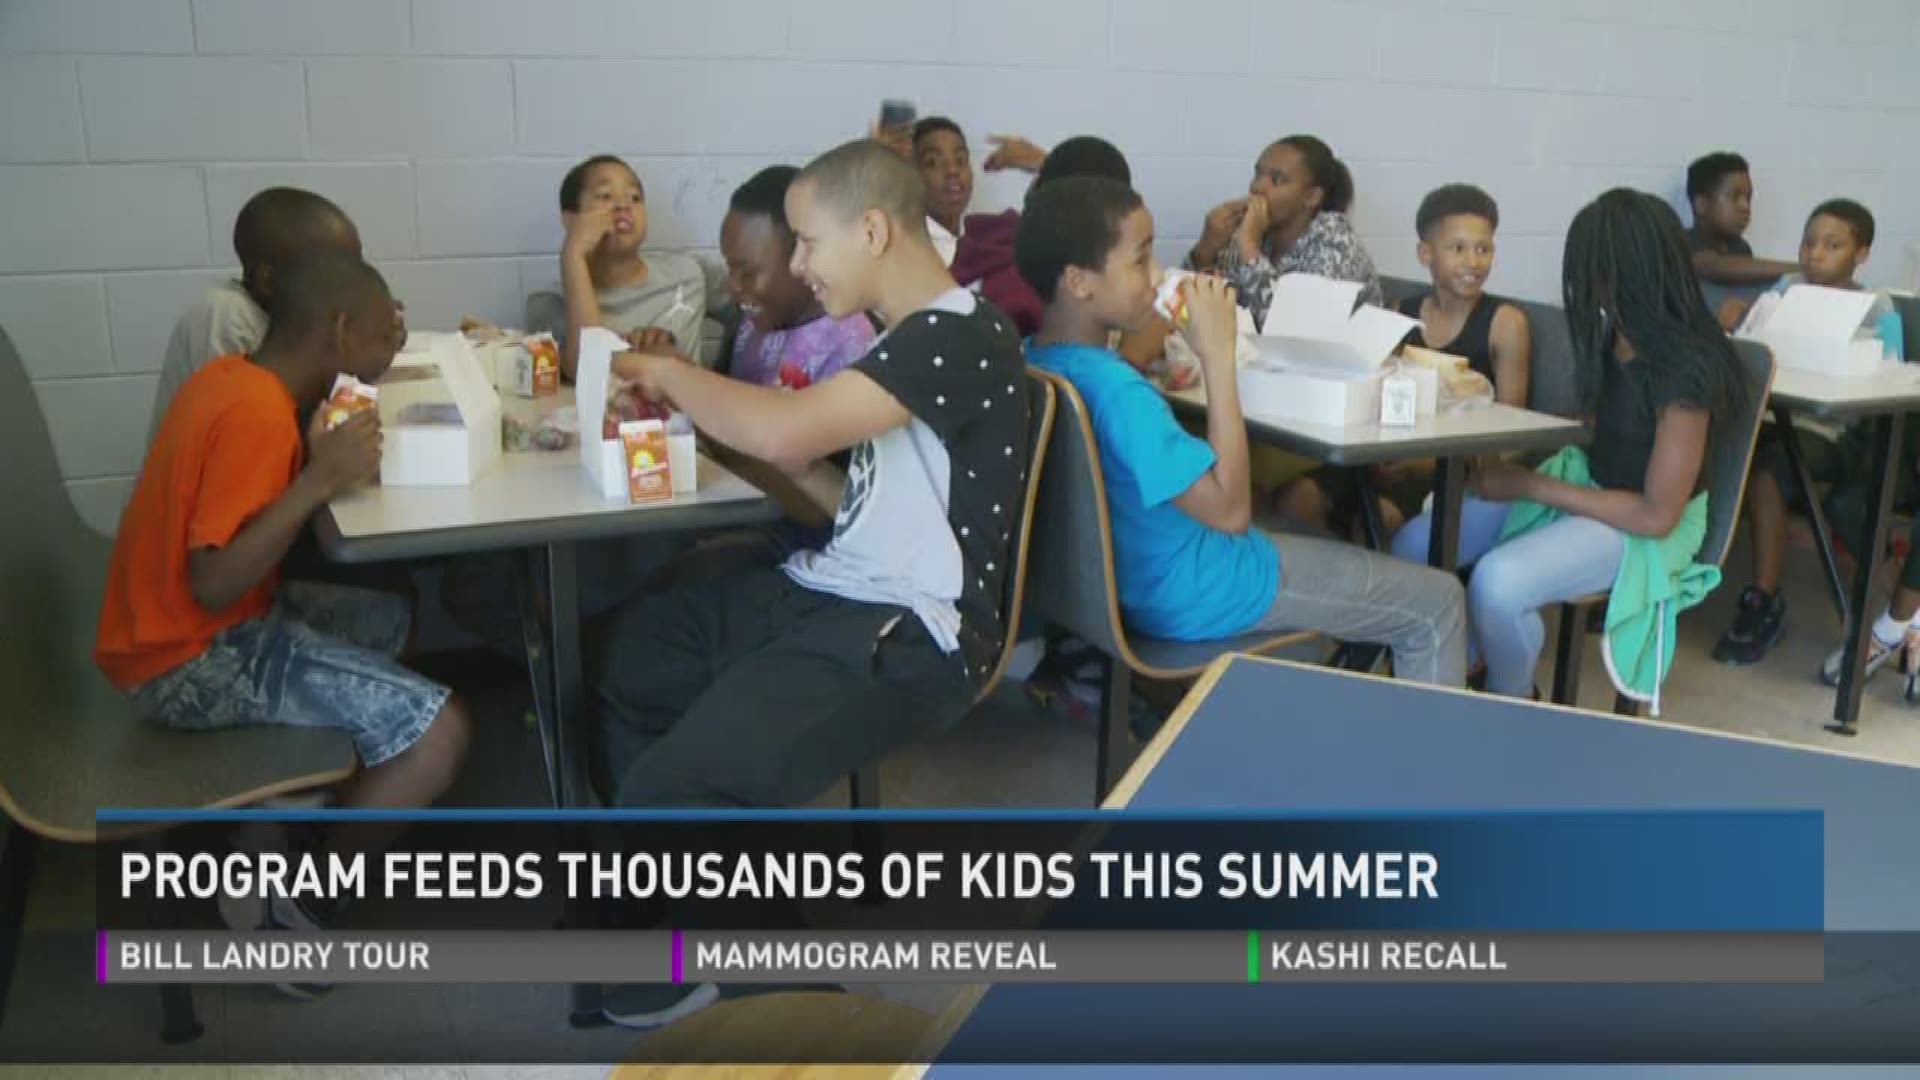 Community Action Committee fights to feed thousands of kids over the summer